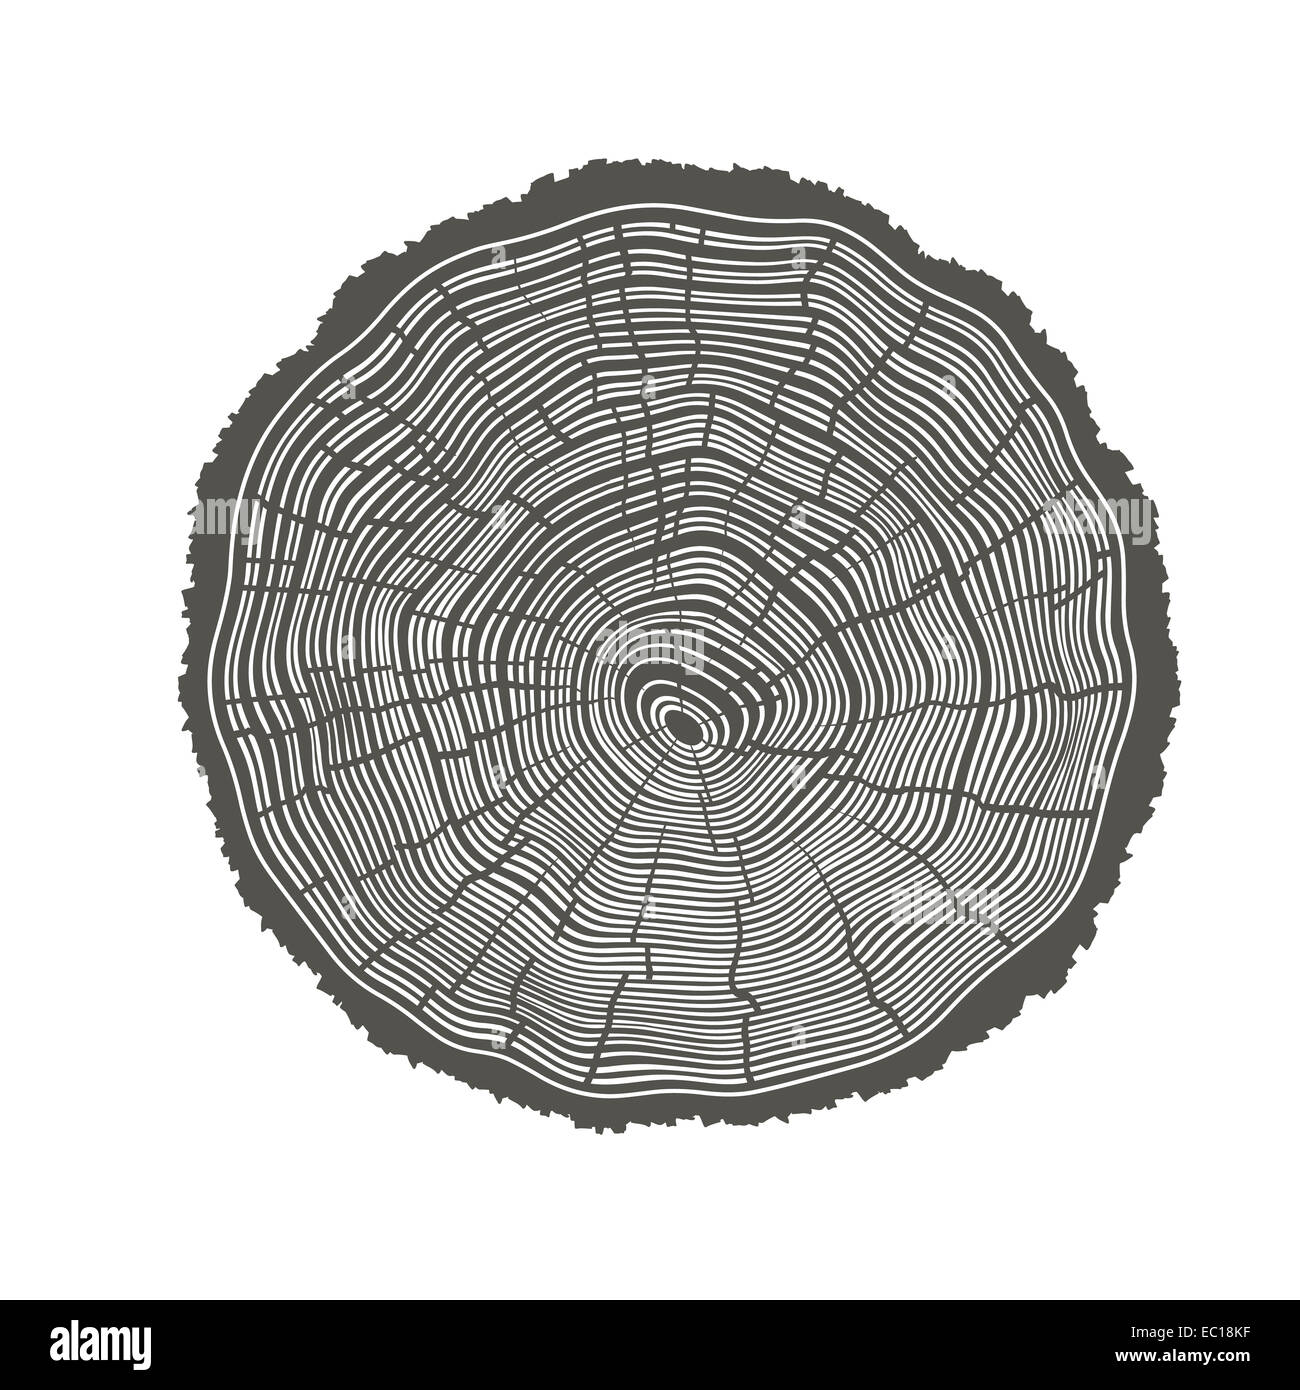 Tree Rings Illustration. Template for annual reports Stock Photo